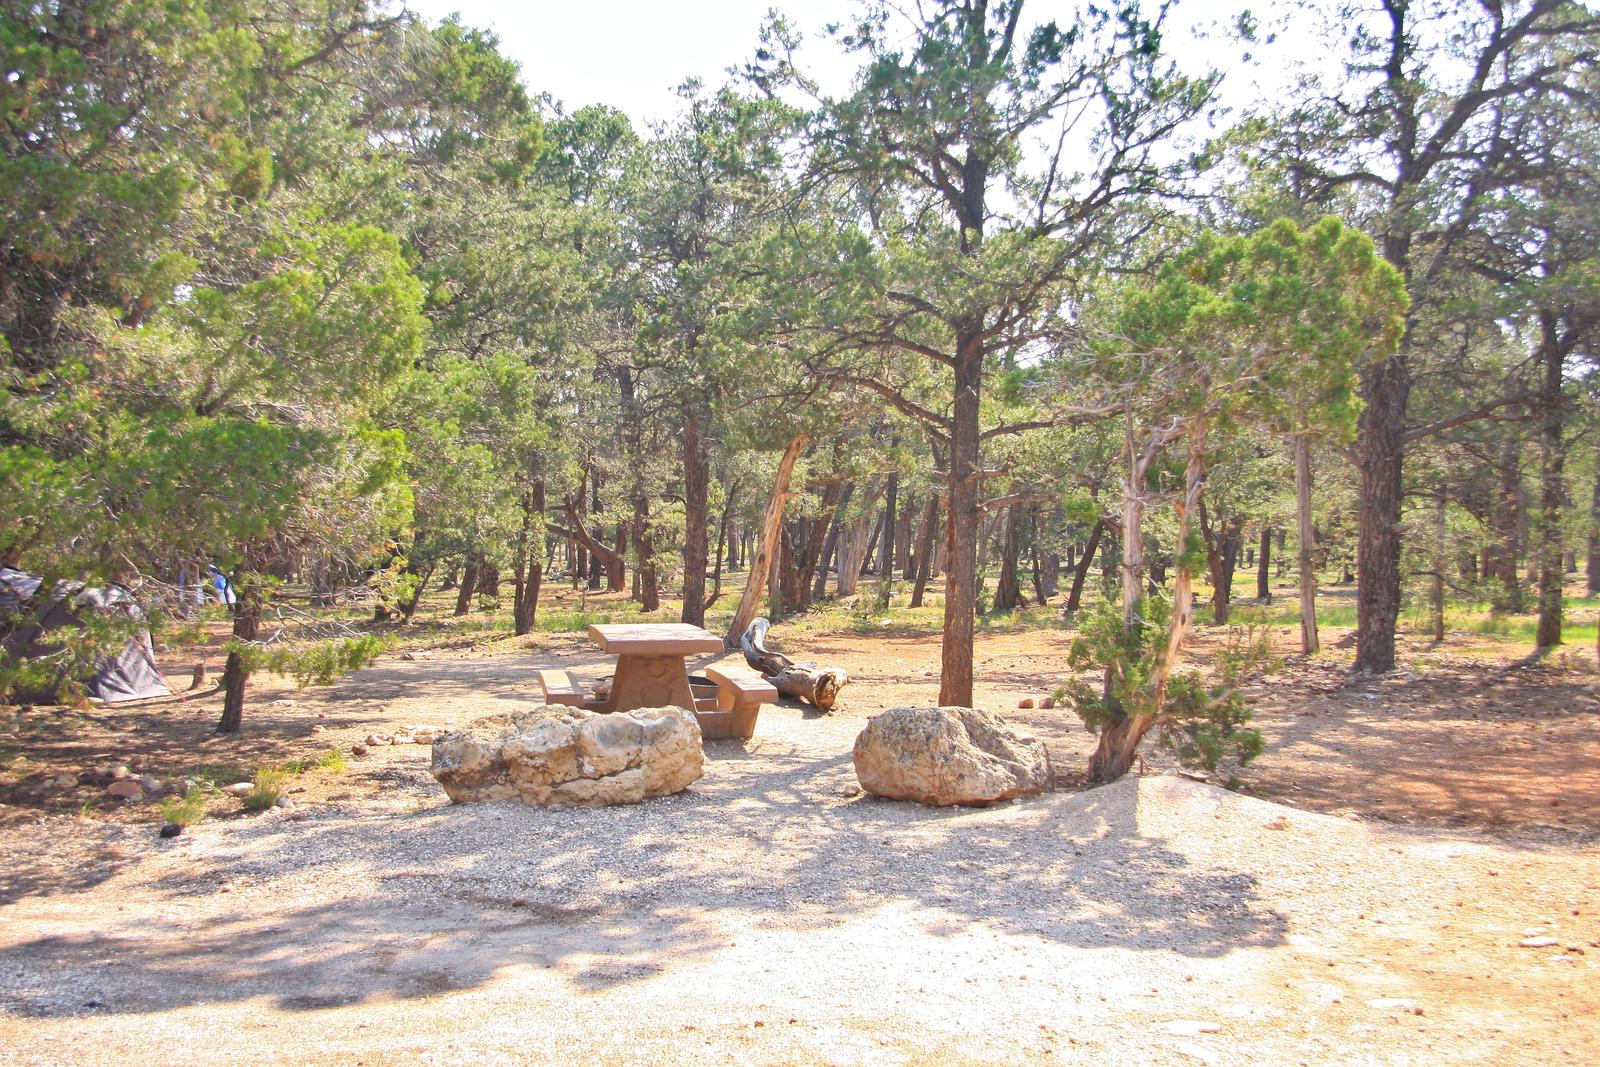 Picnic table, fire pit, and parking spot, Mather CampgroundPicnic table, fire pit, and parking spot for Juniper Loop 173, Mather Campground